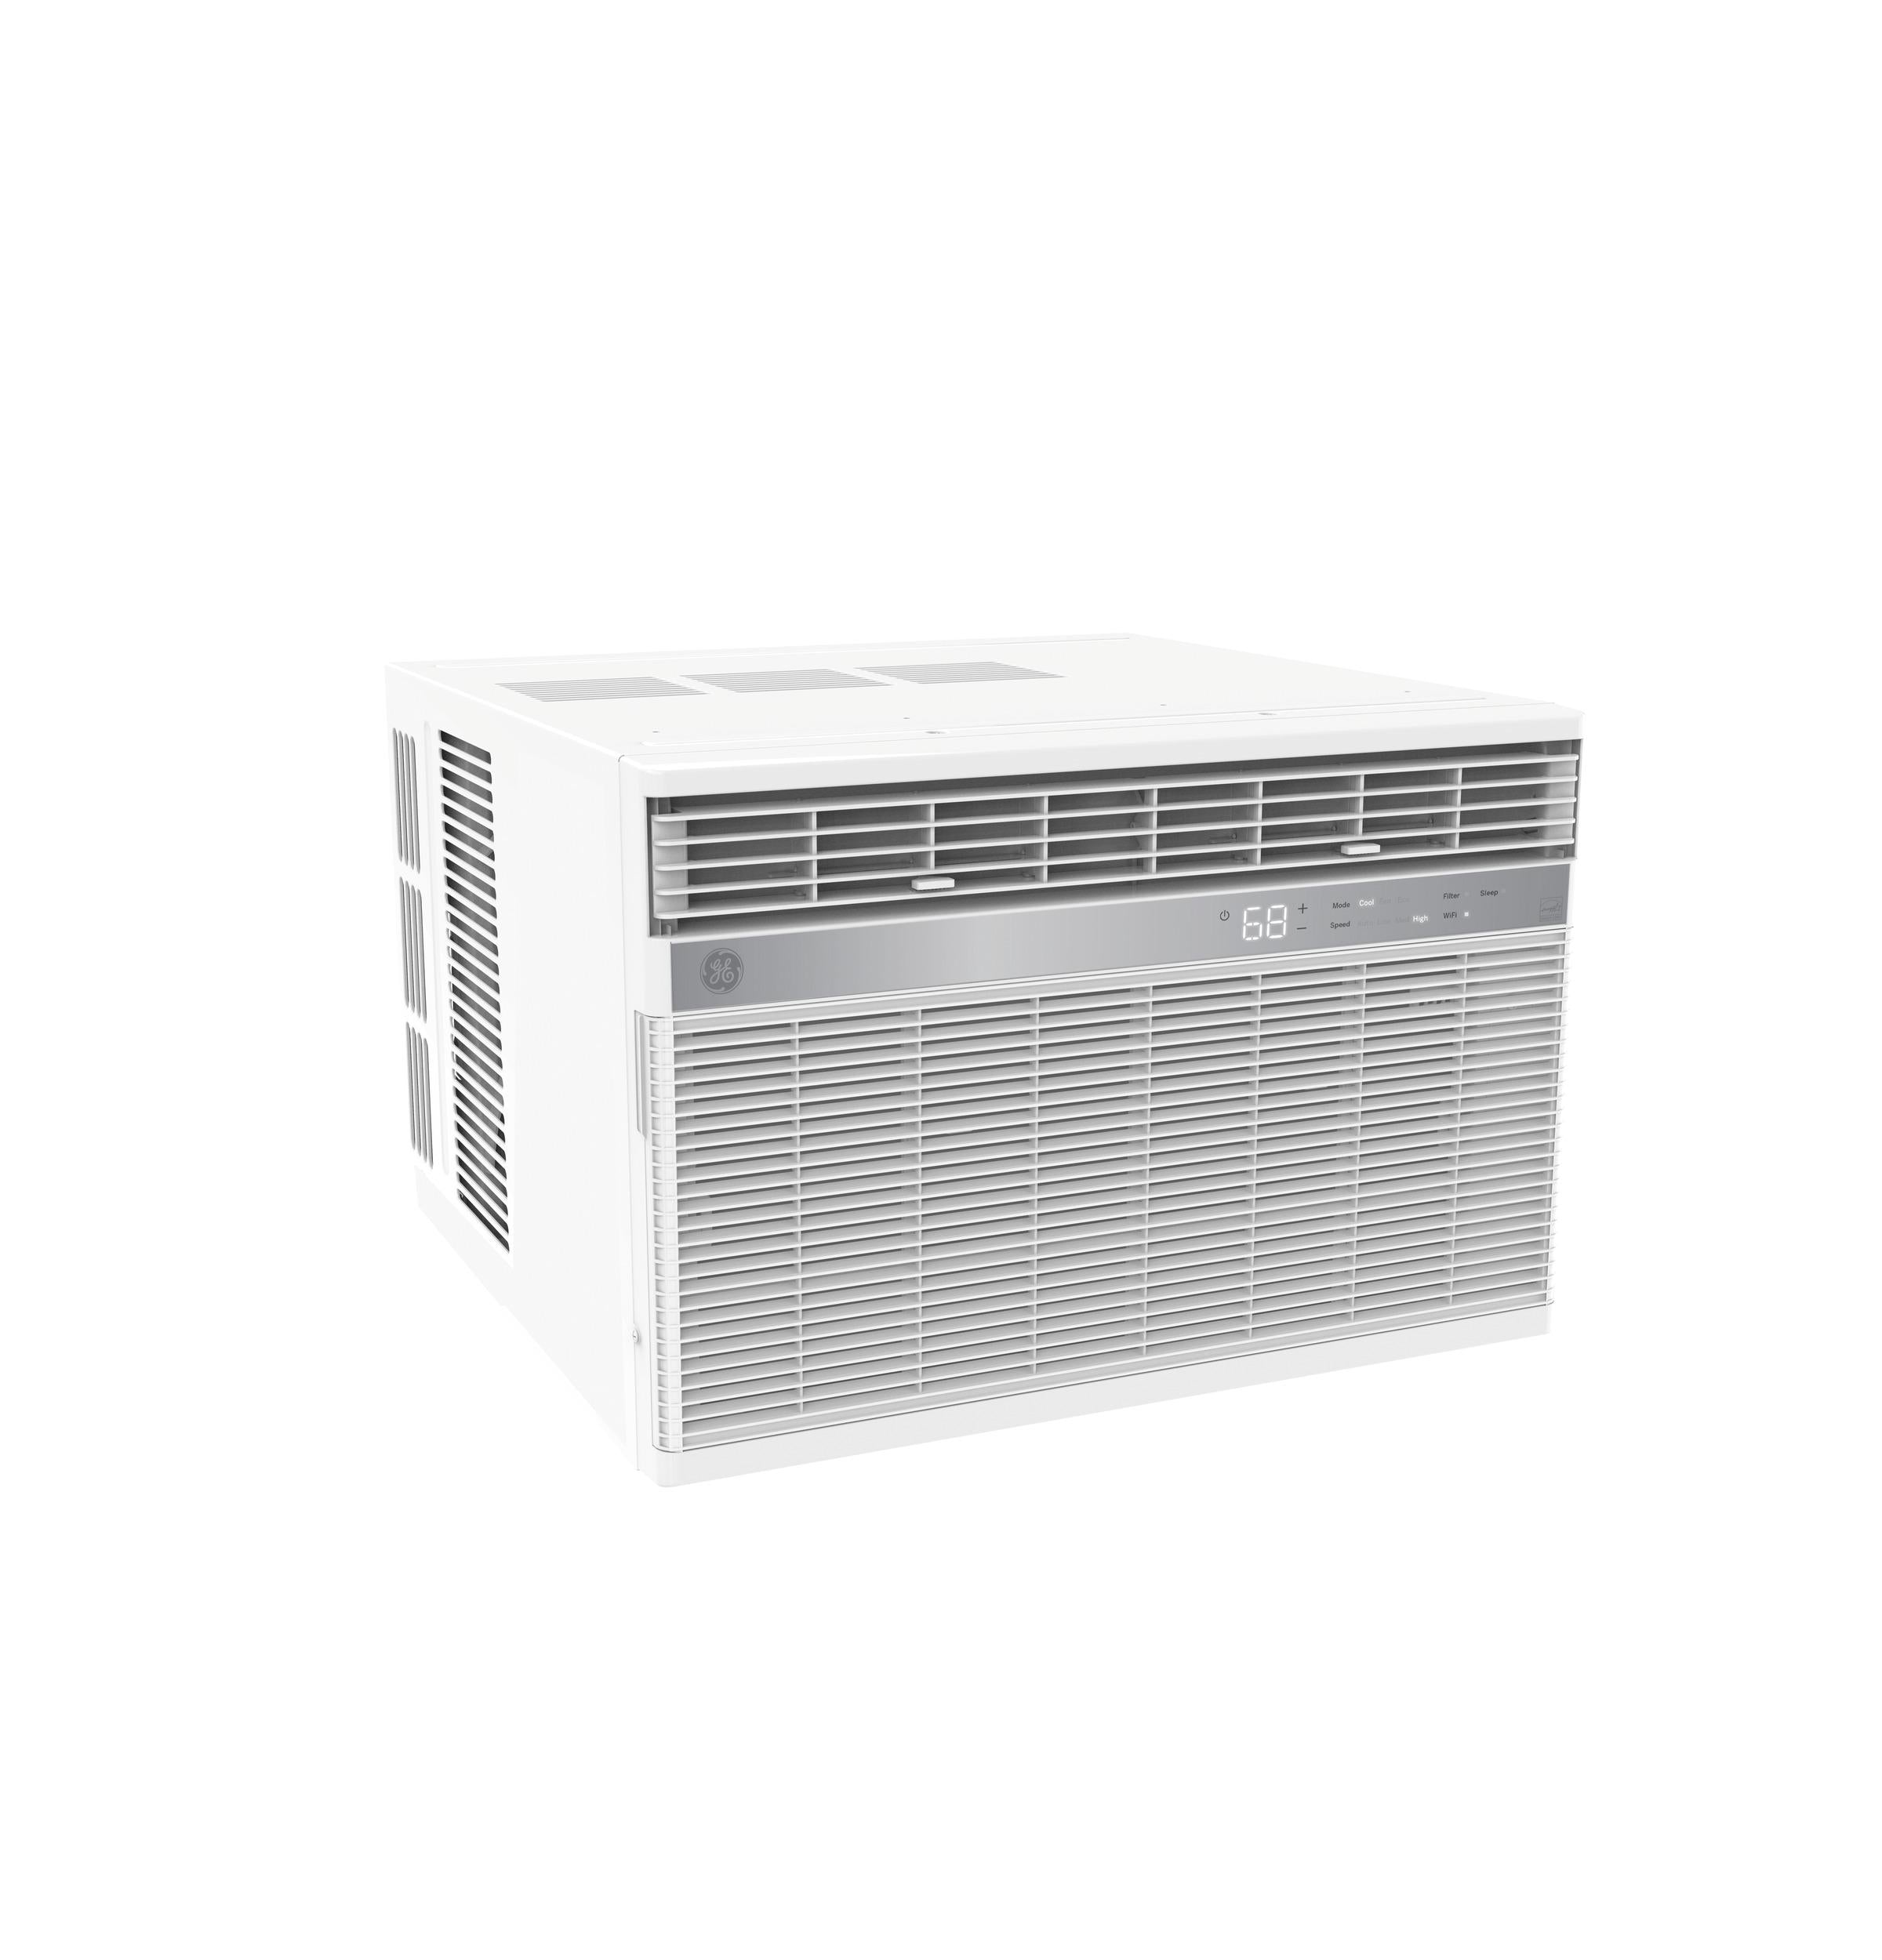 GE® 23,700 BTU Smart Electronic Window Air Conditioner for Extra-Large Rooms up to 1500 sq. ft.